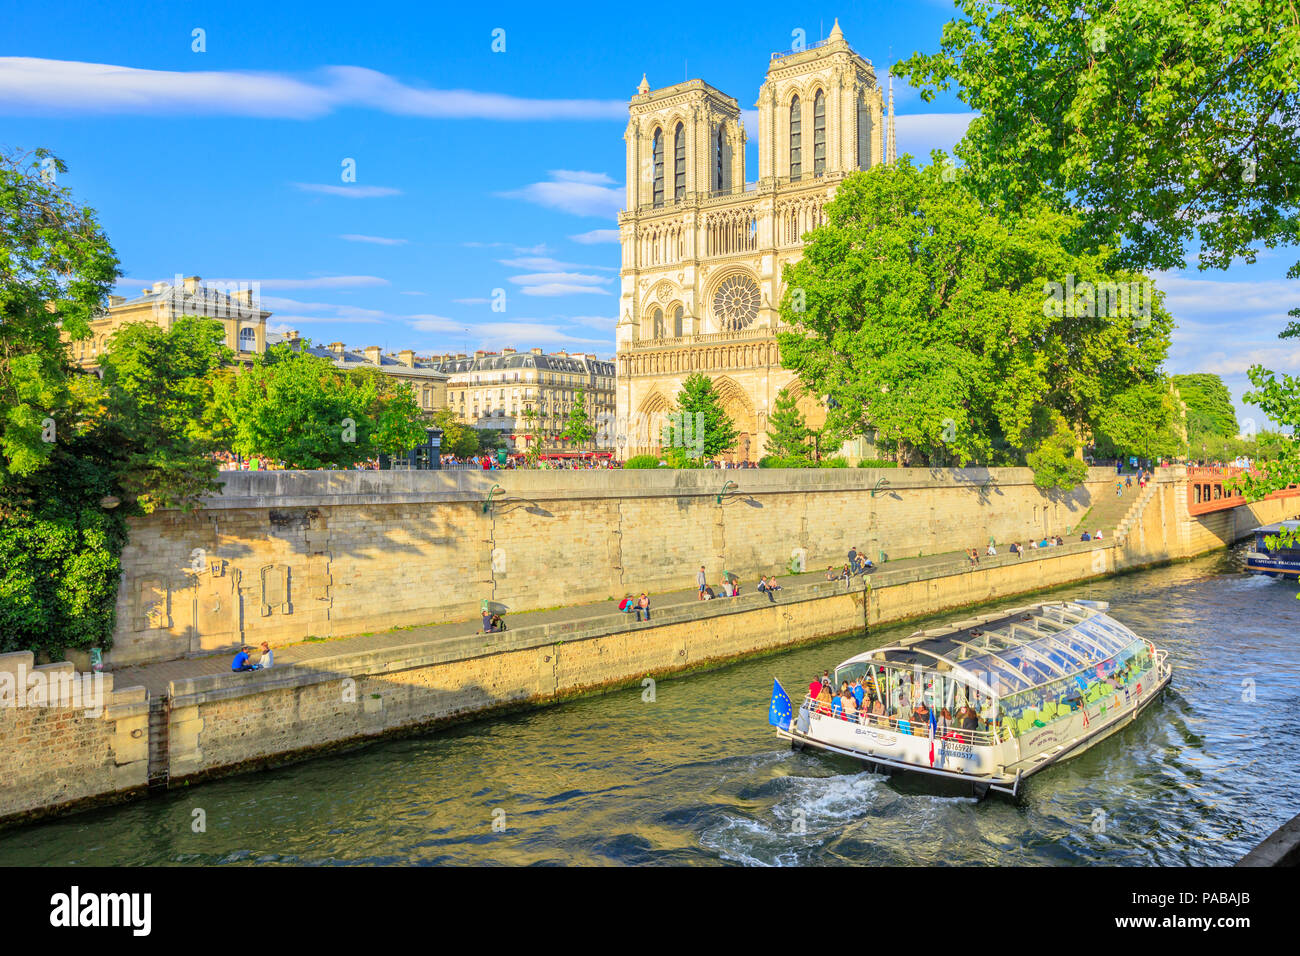 Paris, France - July 1, 2017: Bateaux-Mouches with many tourist during a trip at sunset on River Seine with Cathedral of Notre Dame on the Ile de la Cite on background. Sunny day, blue sky. Stock Photo